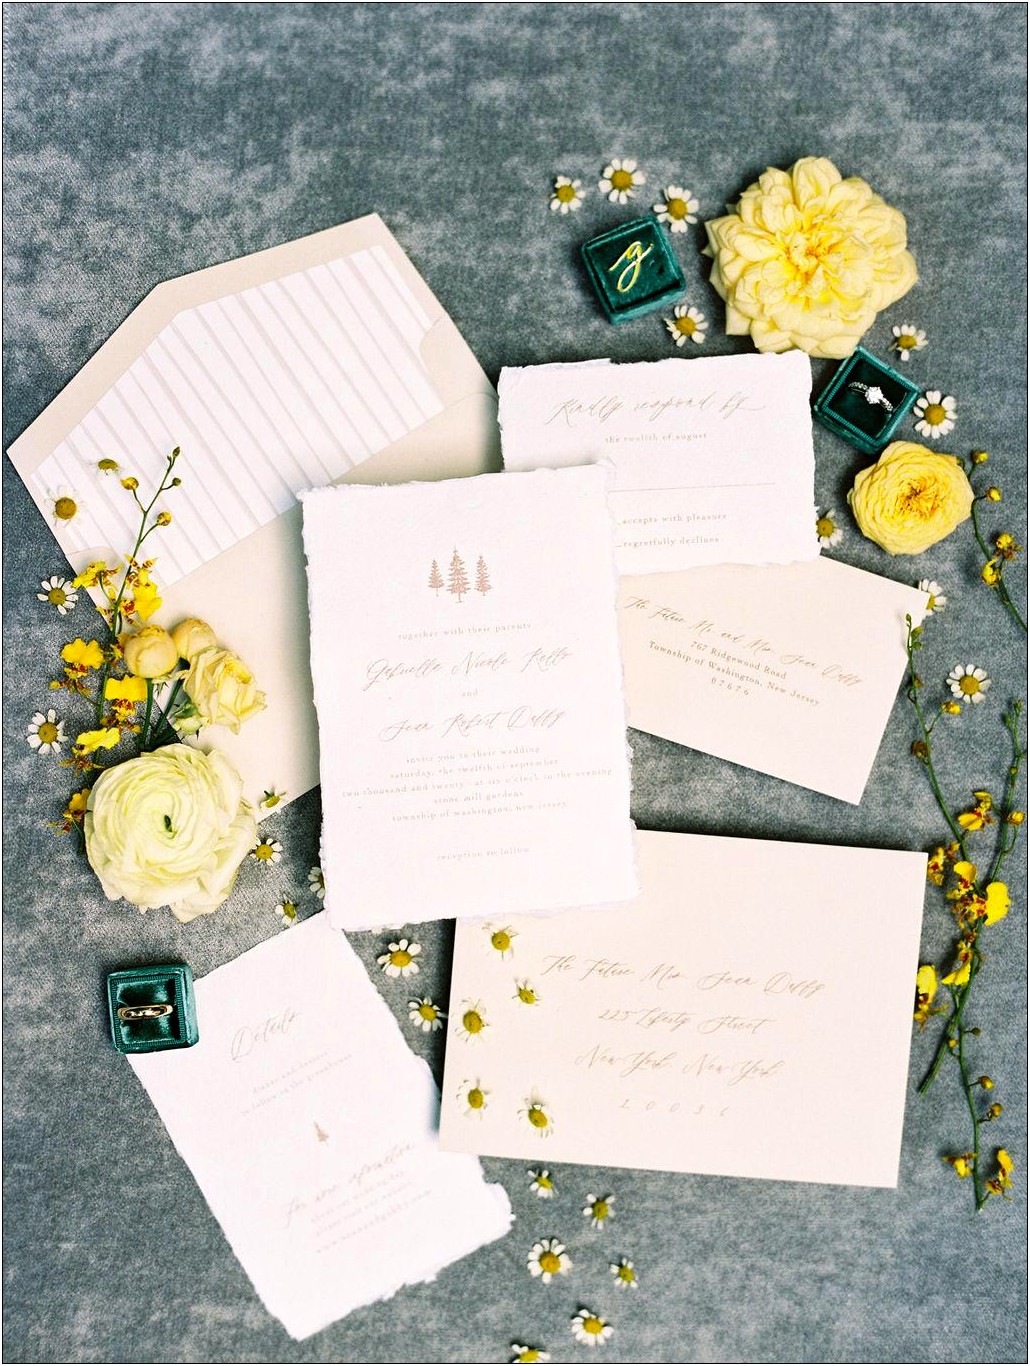 Cheapest Way To Mail Wedding Invitations